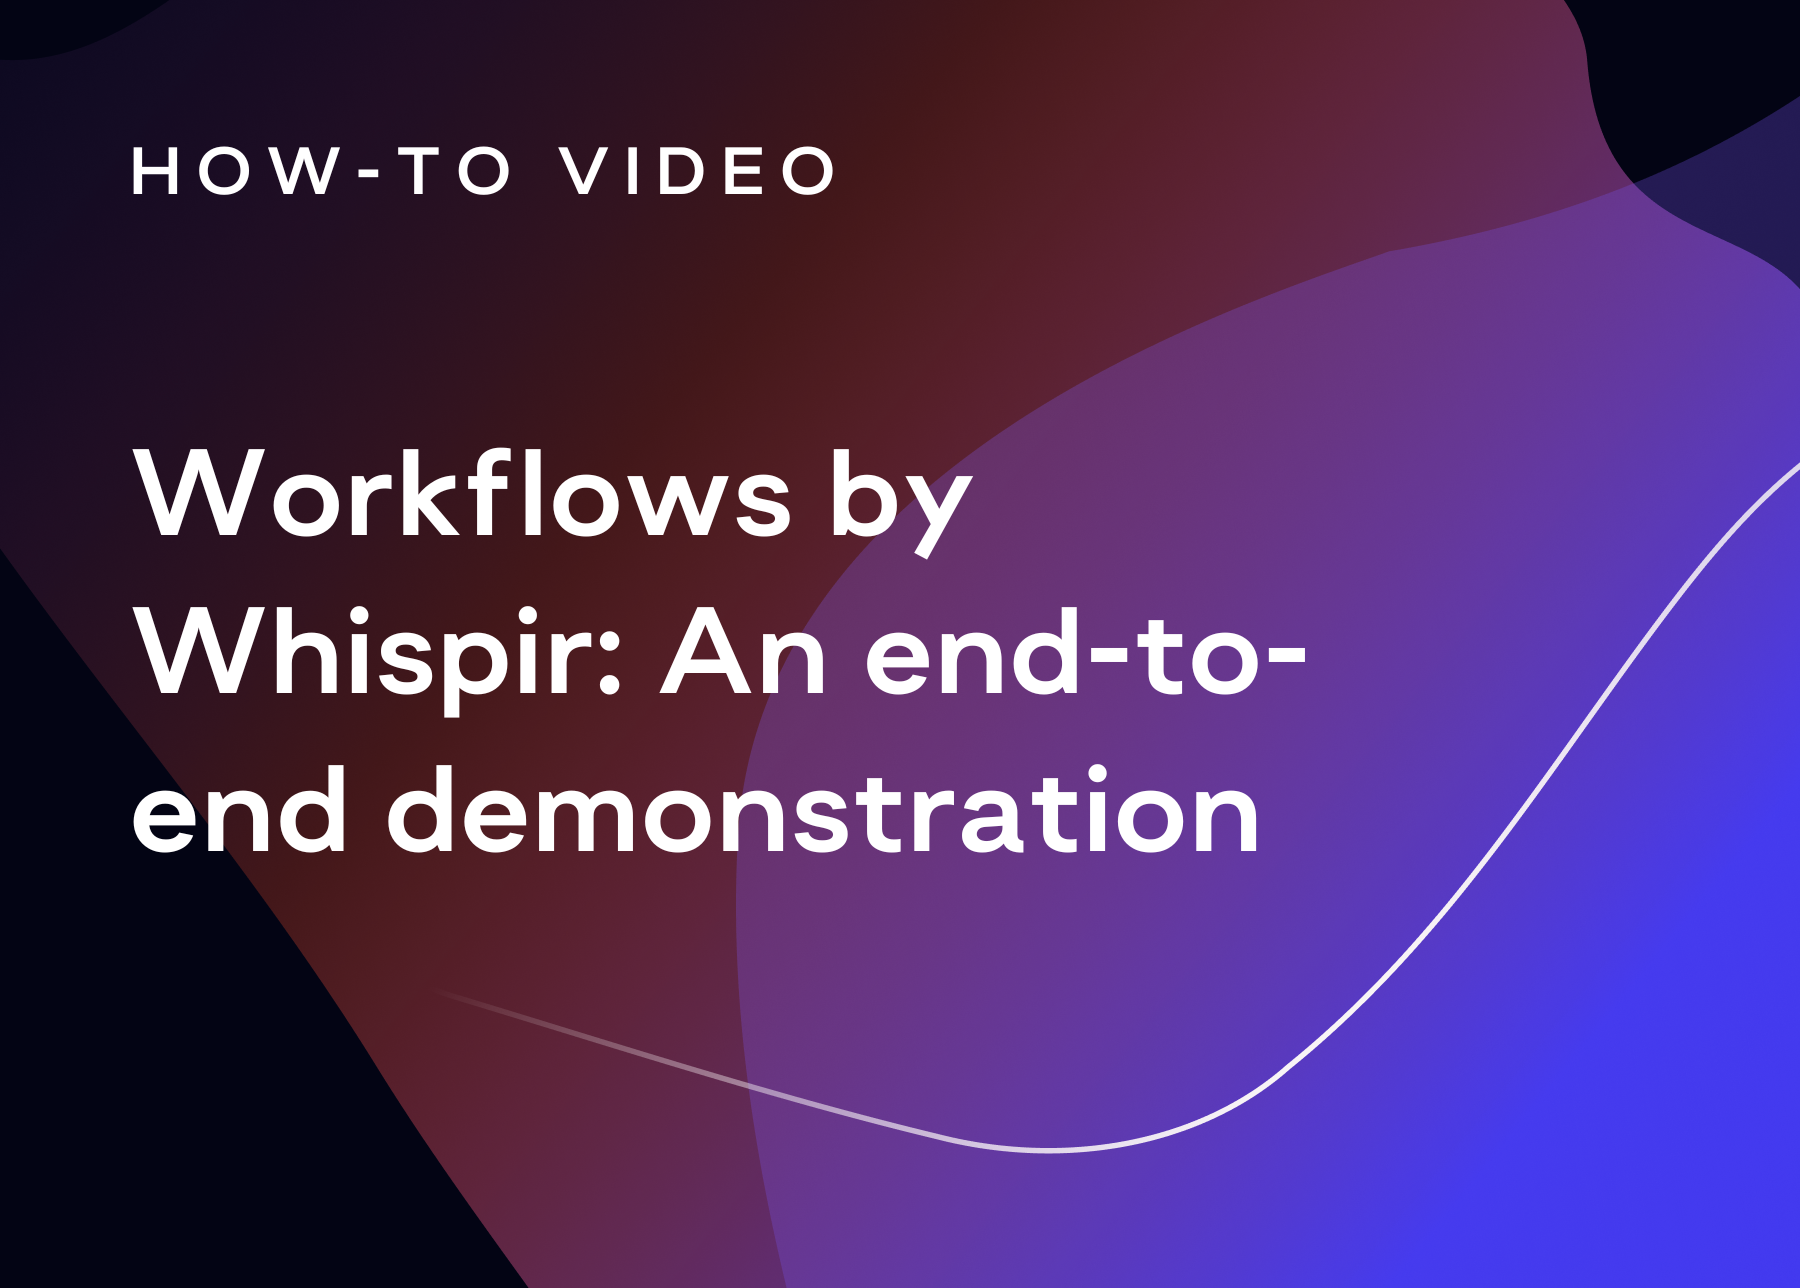 Text that reads: How-to Video and Workflows by Whispir: An end-to-end demonstration